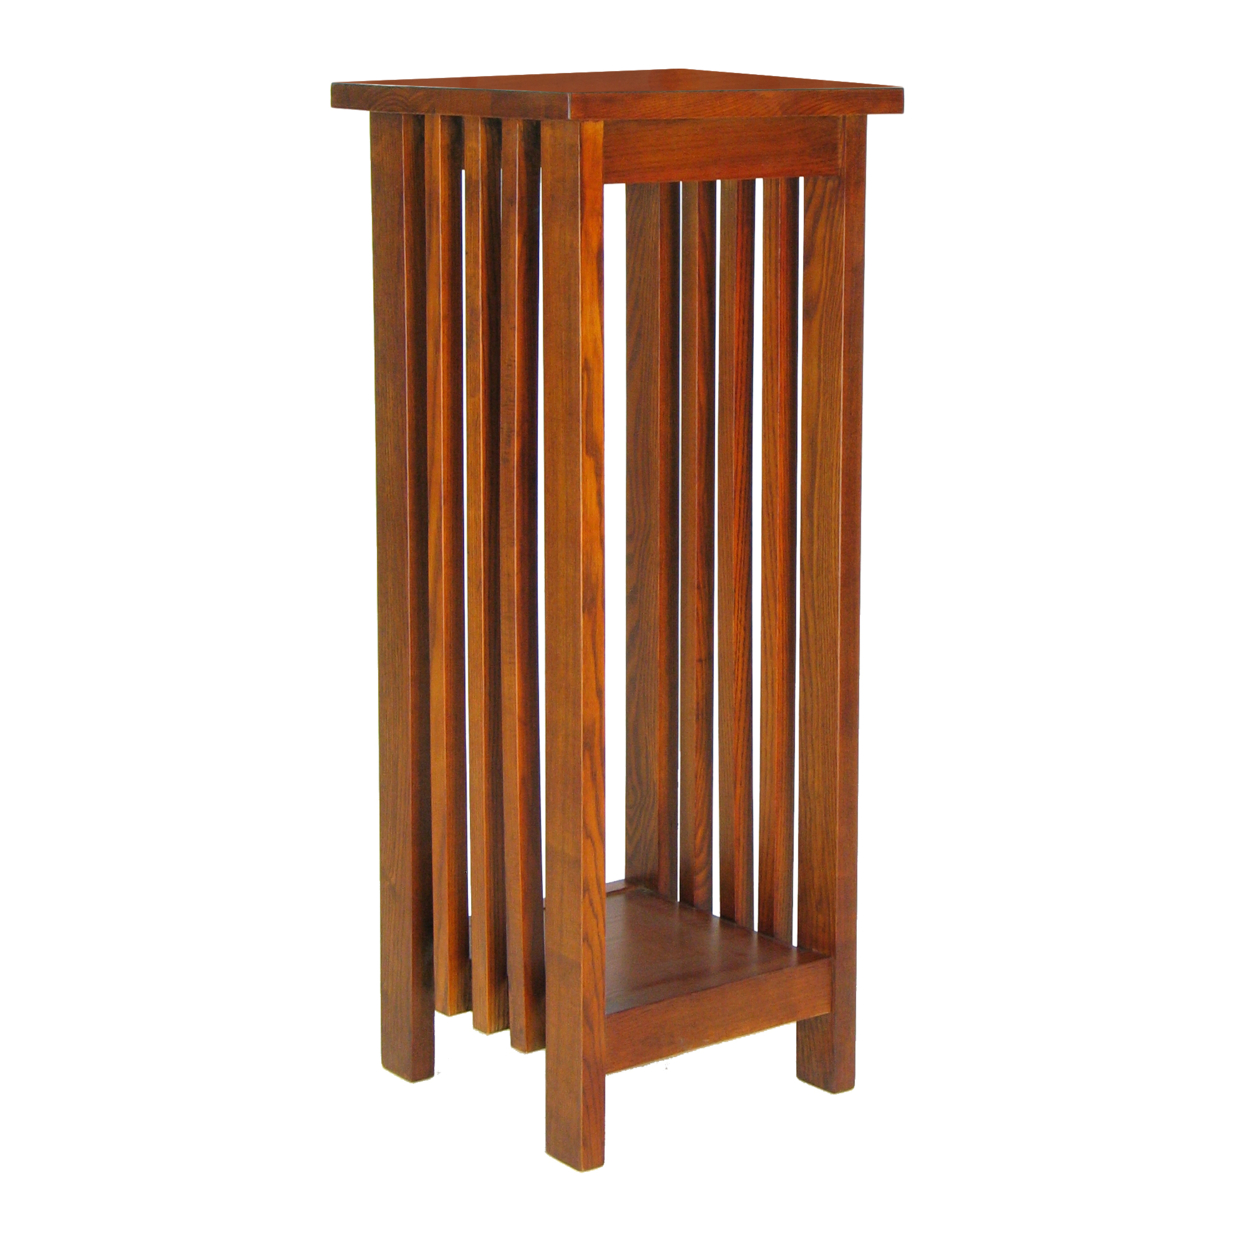 30 Inch Wooden Flower Stand With Bottom Shelf And Slatted Sides, Brown- Saltoro Sherpi